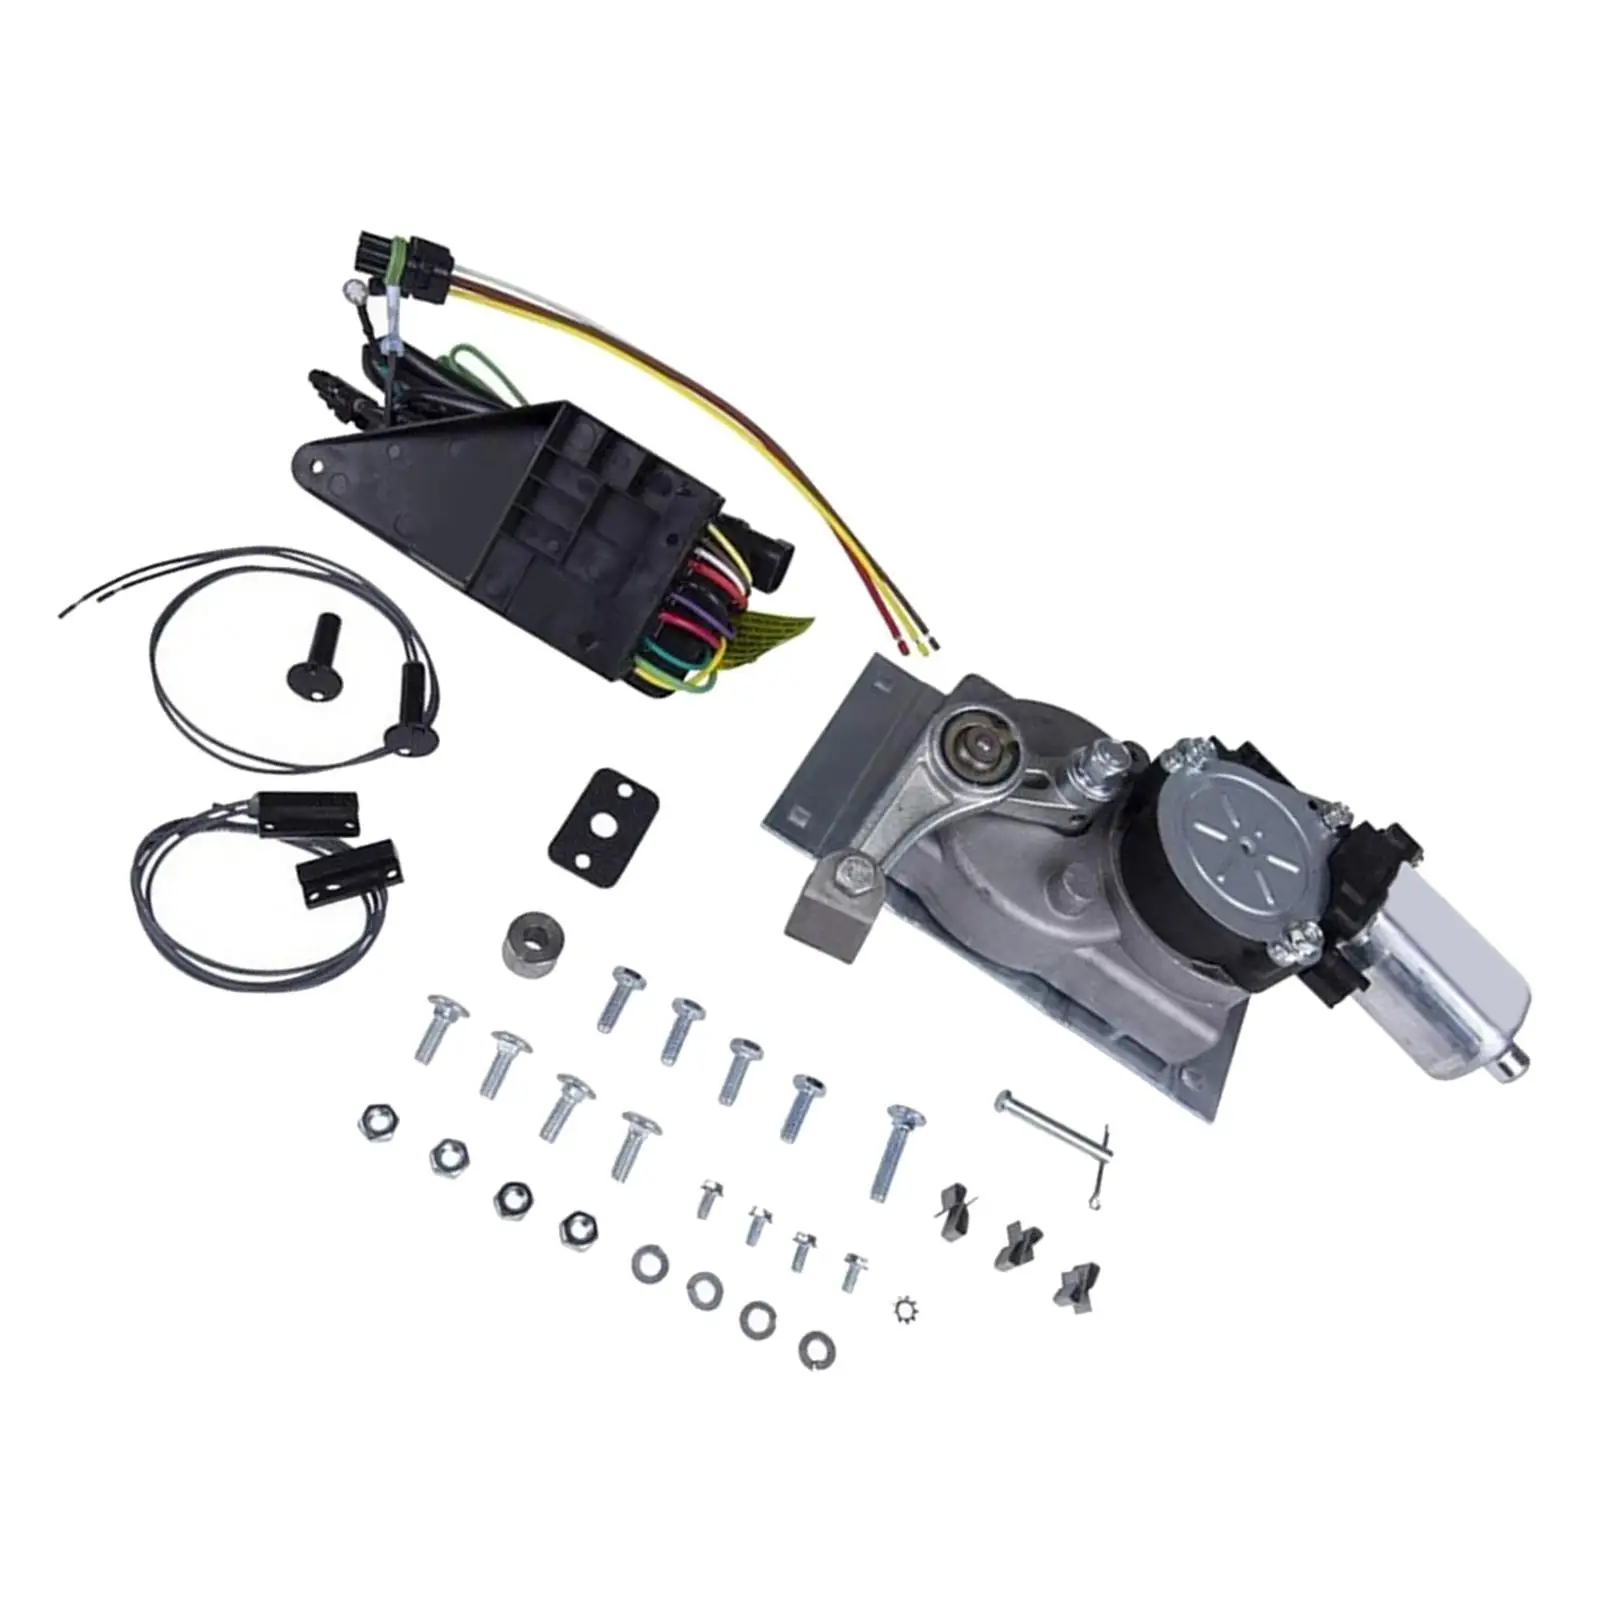 RV Trailer Step Motor Conversion Kit Electric RV Step Motor Gearbox Kit for Transport Vehicle Rvs Convenient Installation